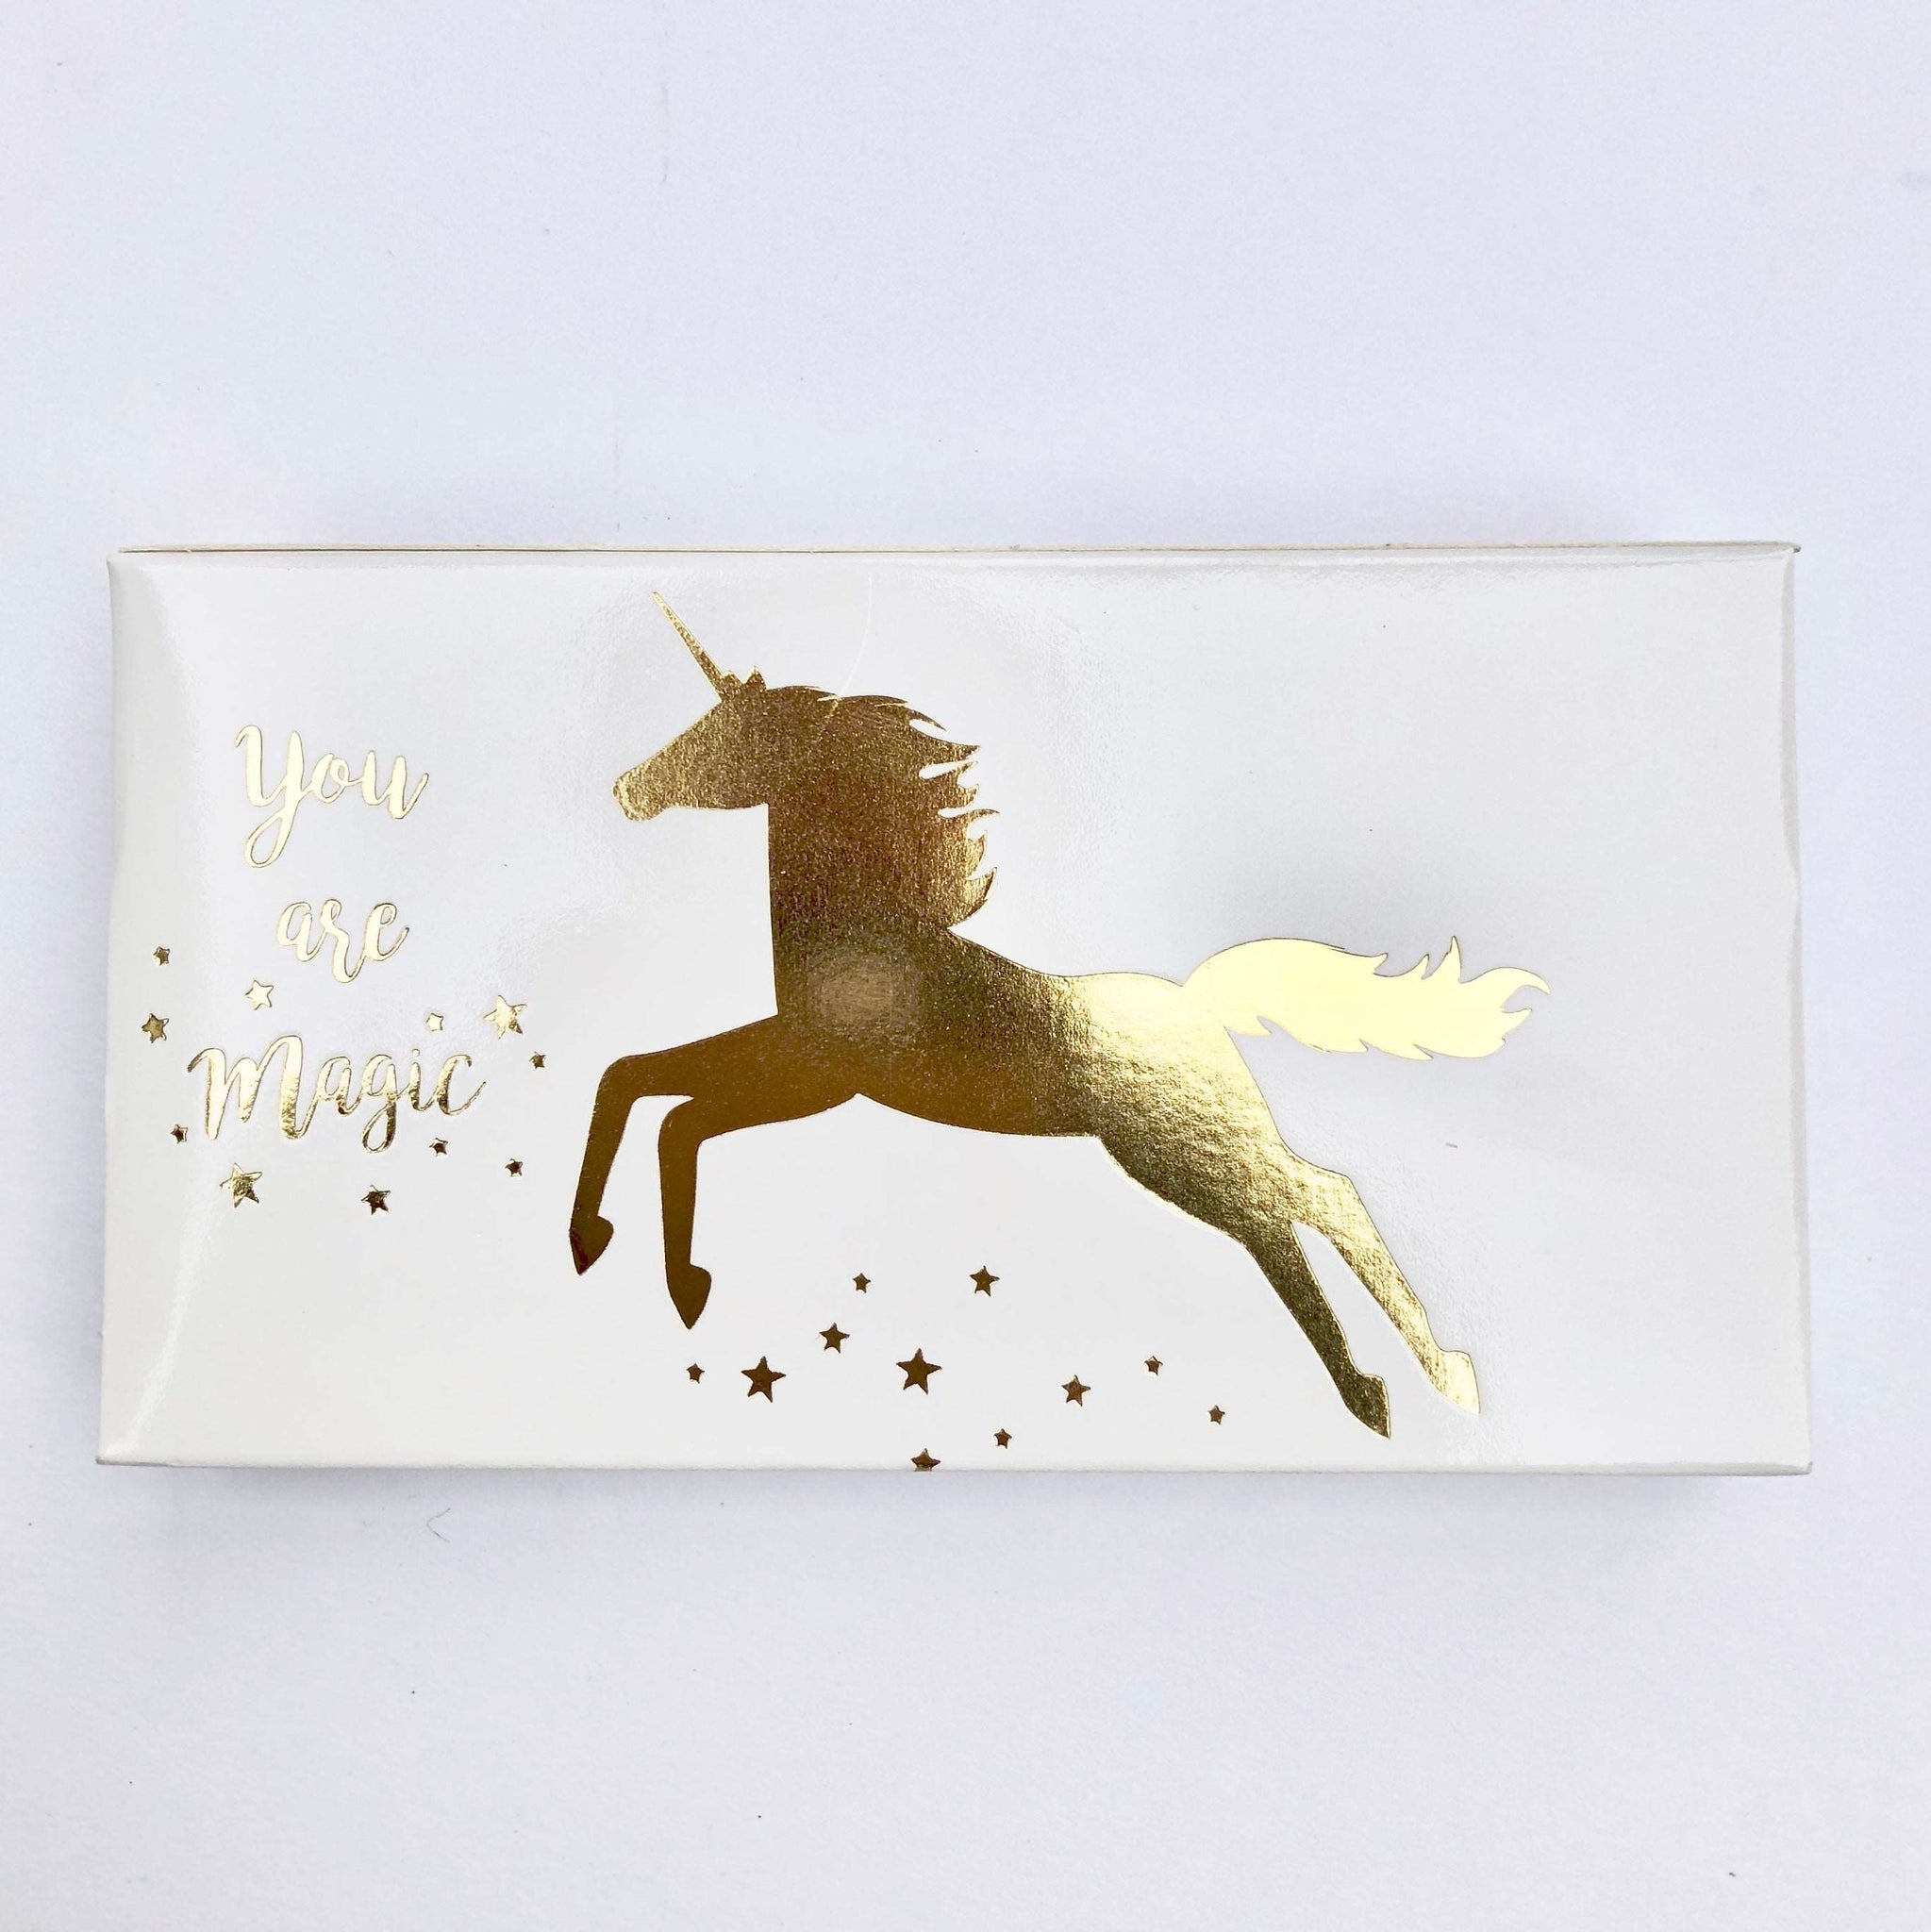 These Unicorn jumbo matches are perfect for lighting our hand poured soy candles!  These decorative matches are a lovely addition to enhance any home décor.  Our designer match boxes are reusable, and each comes with 50 matches tipped in white.